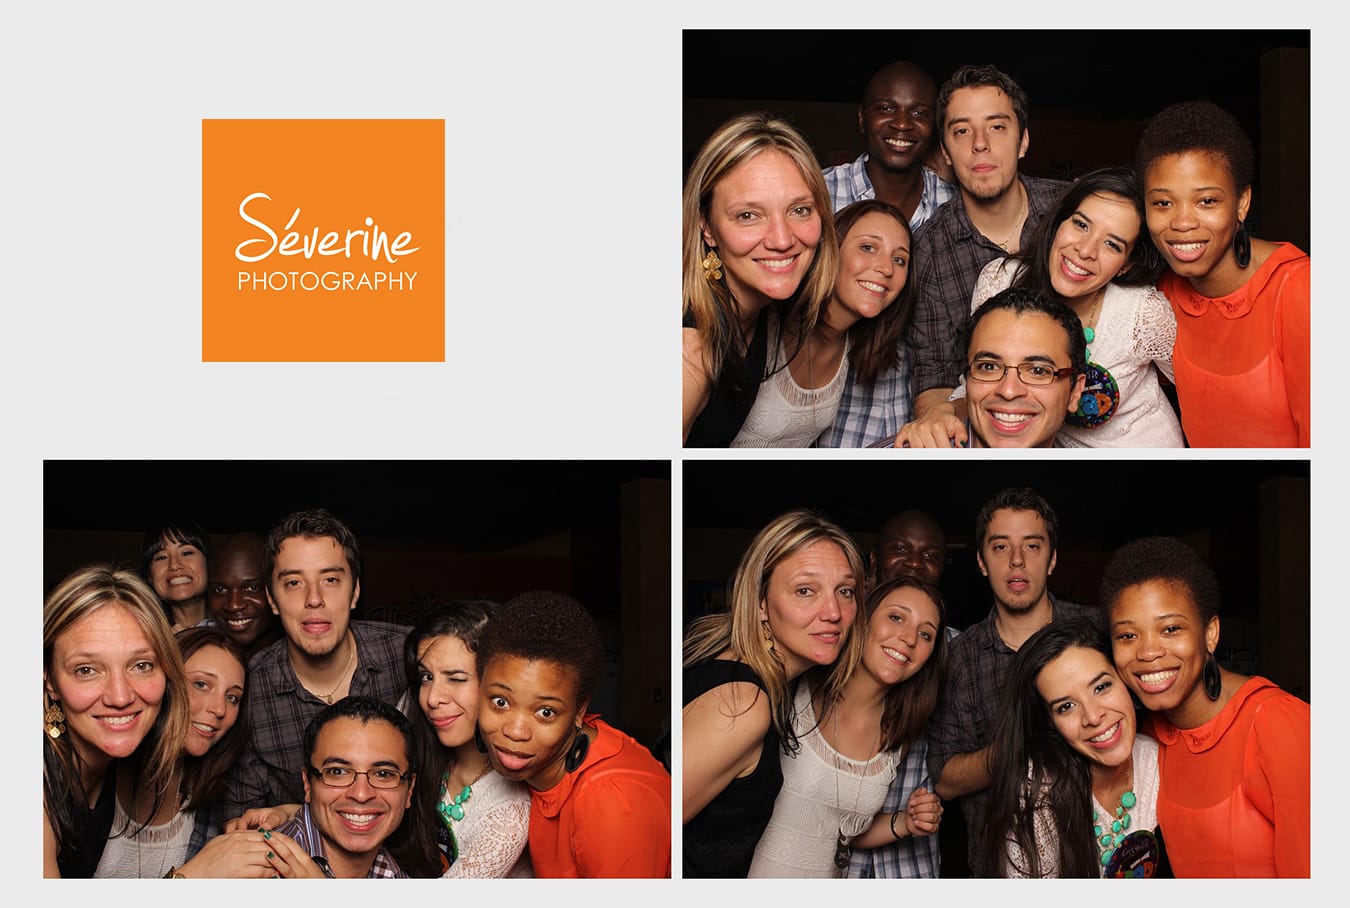 Severine Photography Photo Booth